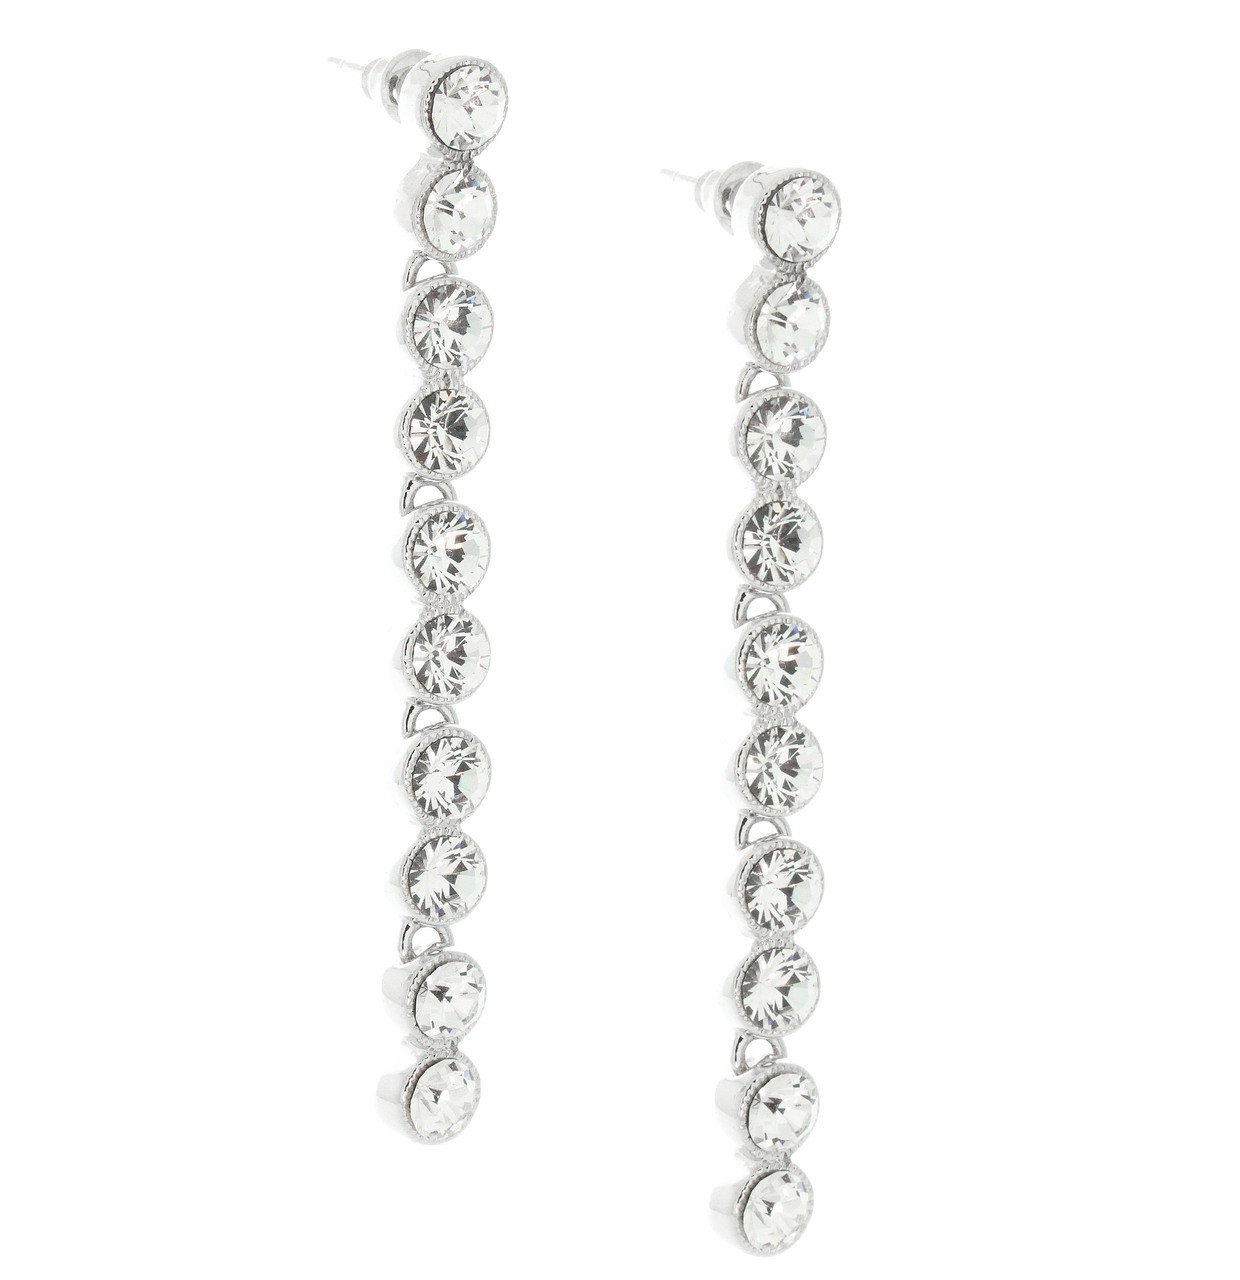 Round Stone Linear Drop Earrings Made With Clear Crystals - Artune 